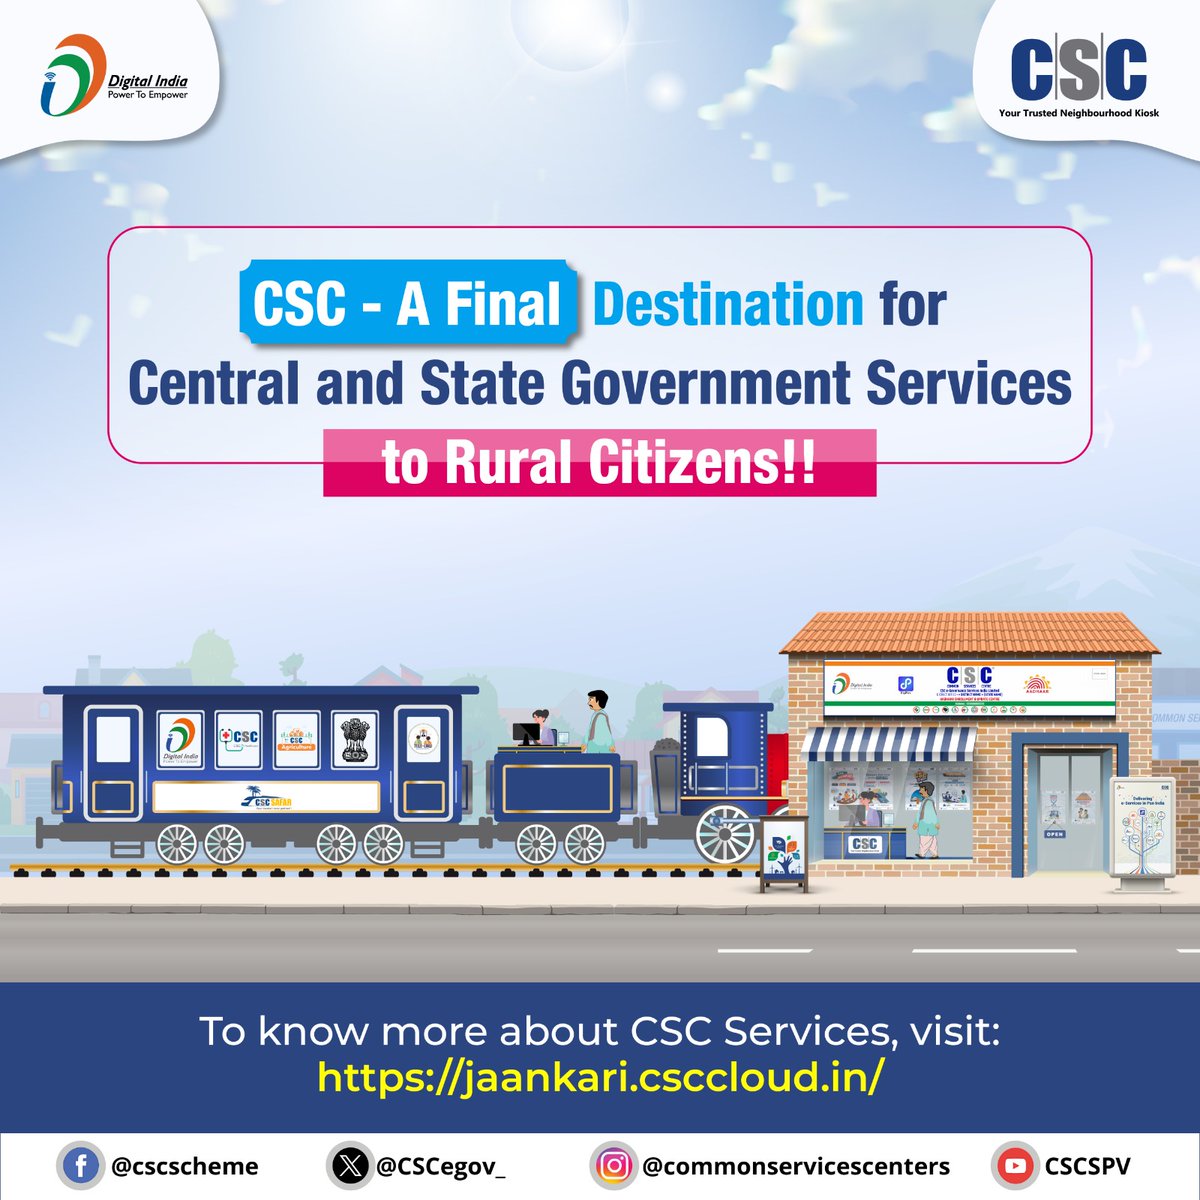 CSC - A Final Destination for all Central and State Government Services to Rural Citizens... To know more about #CSC Services, visit: jaankari.csccloud.in For any queries, call 14599 or write to helpdesk@csc.gov.in #DigitalIndia #CSCJaankariPortal #JaankariSuvidhaPortal